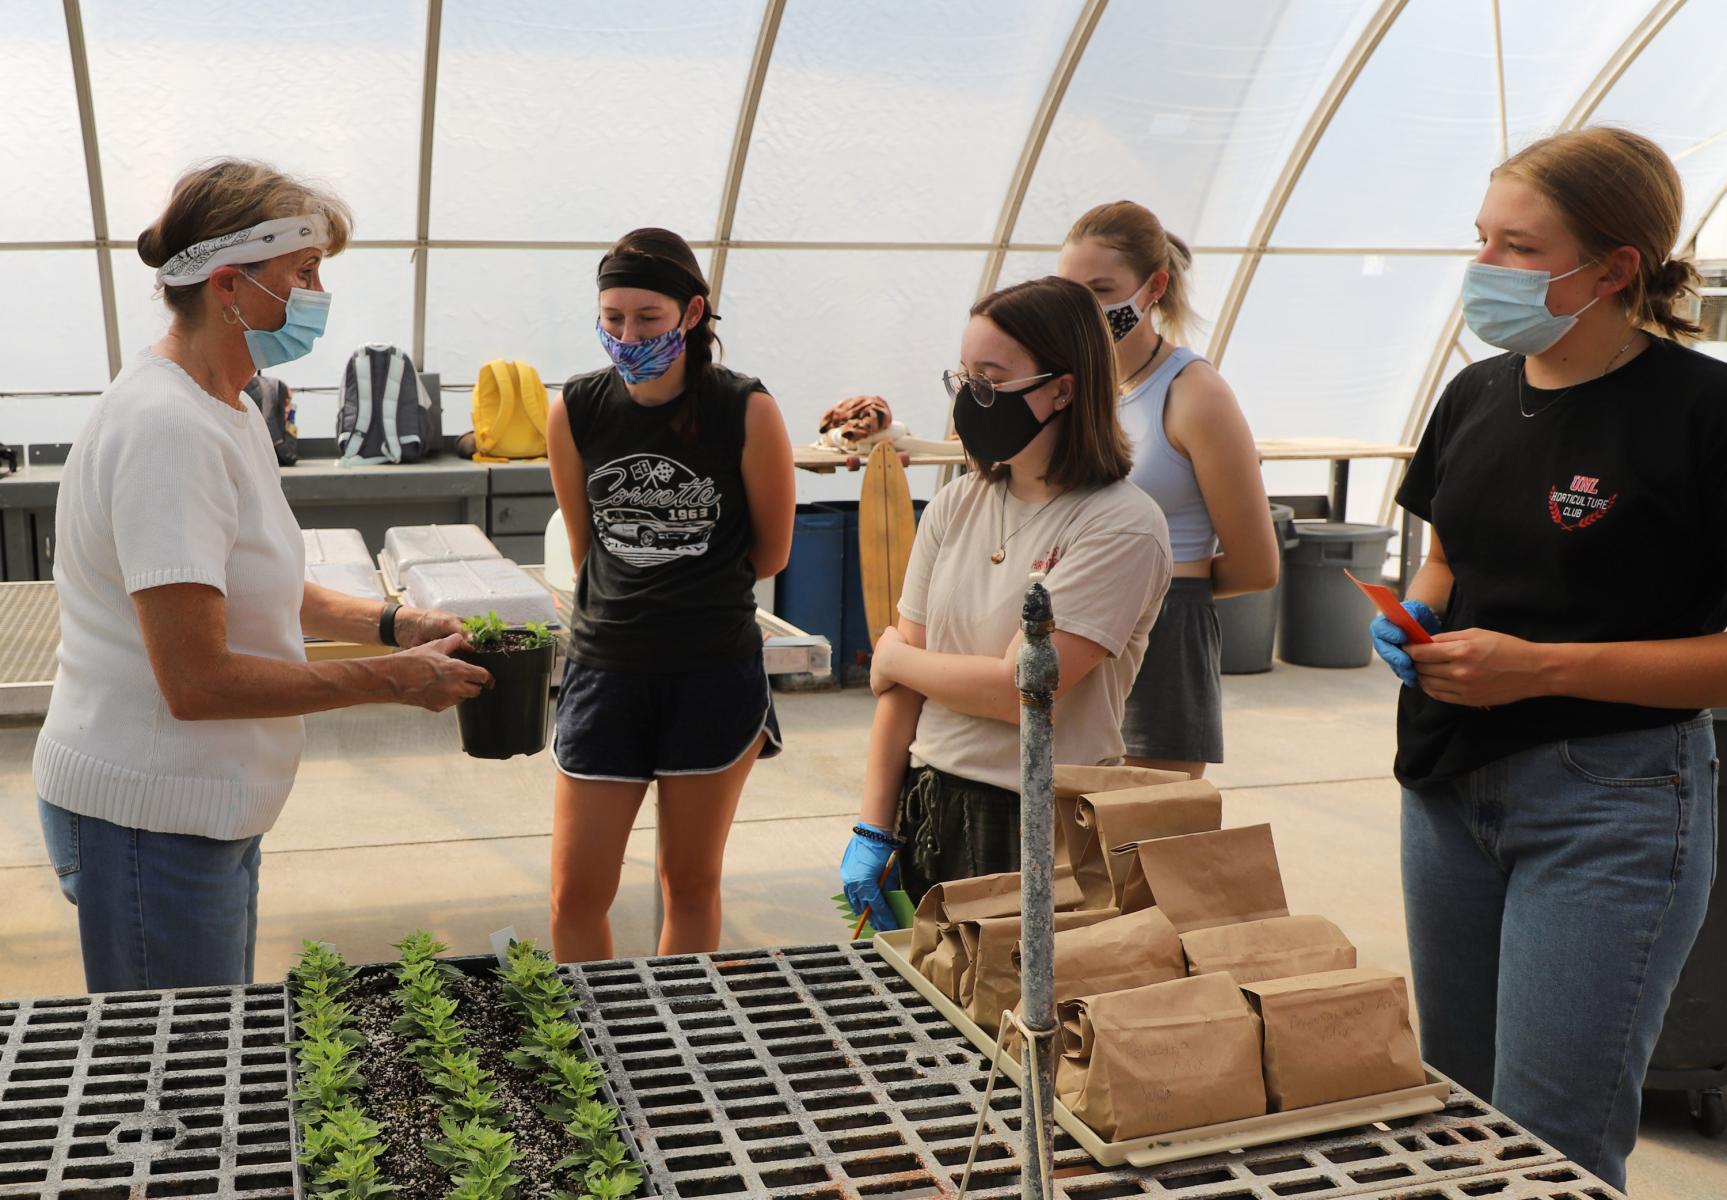 Ellen T. Paparozzi, left, Department of Agronomy and Horticulture professor, demonstrates how to properly transplant plants to Anna Wennekamp, Jamie Dasenbrock, Hallie Savidge and Victoria Boden in the Horticulture 355 Perennial, Pot and Bedding Plant Production Laboratory class in an East Campus greenhouse. 
 